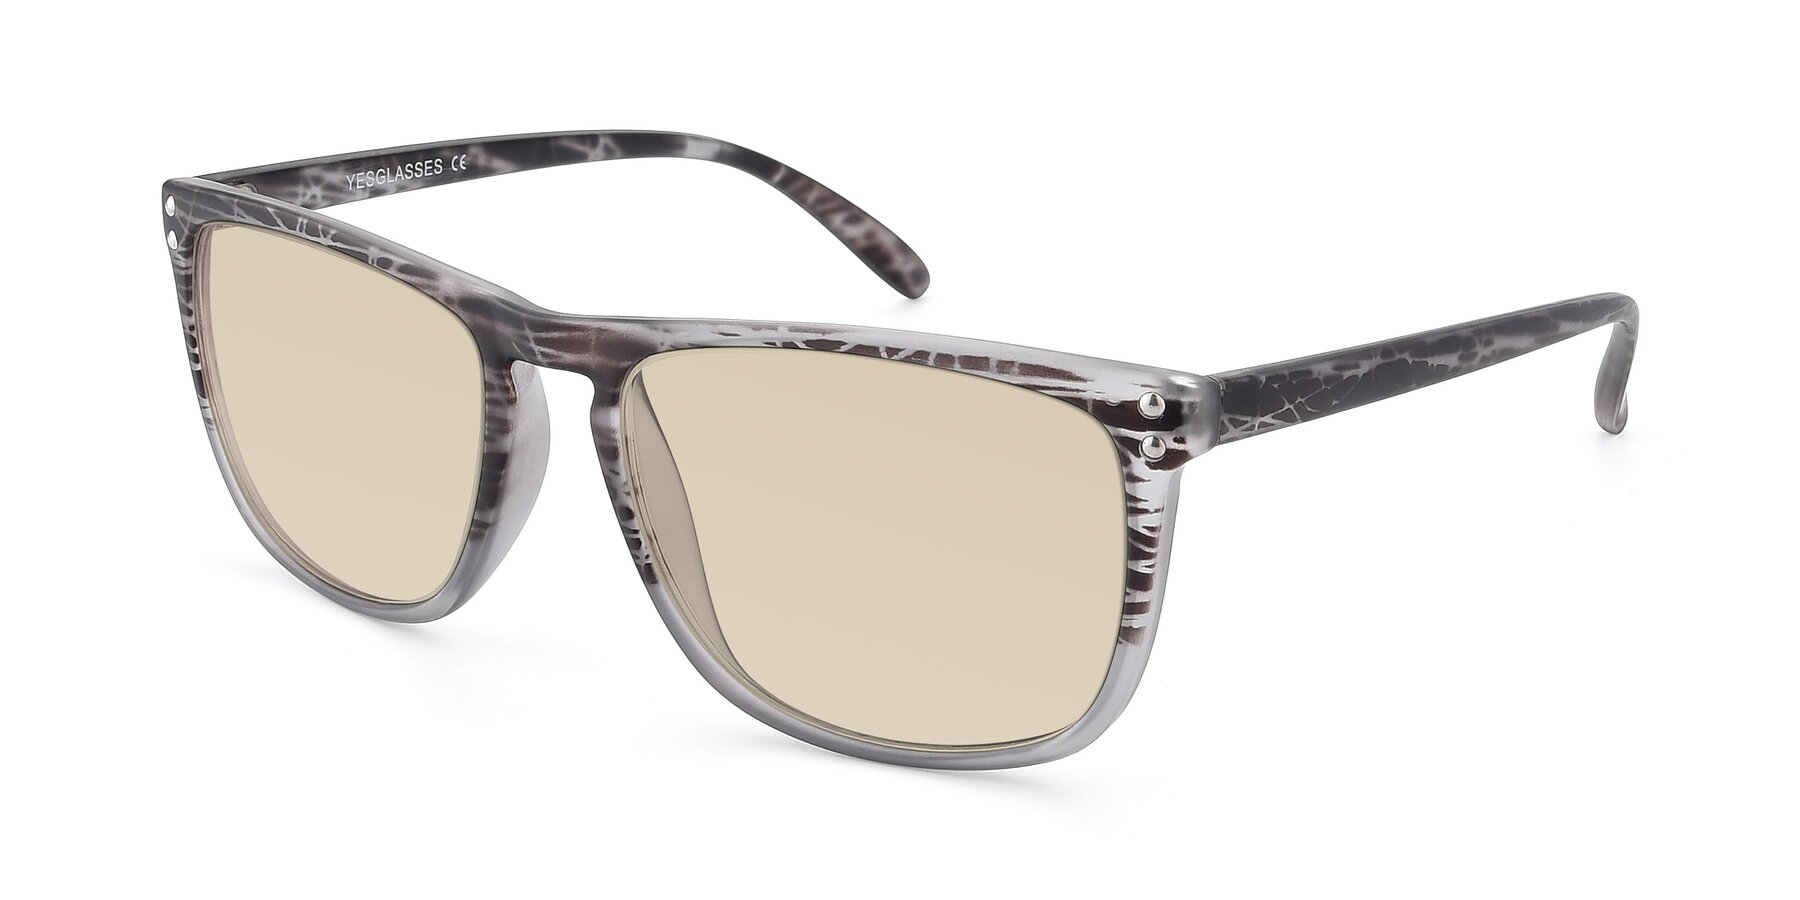 Angle of SSR411 in Translucent Floral Grey with Light Brown Tinted Lenses